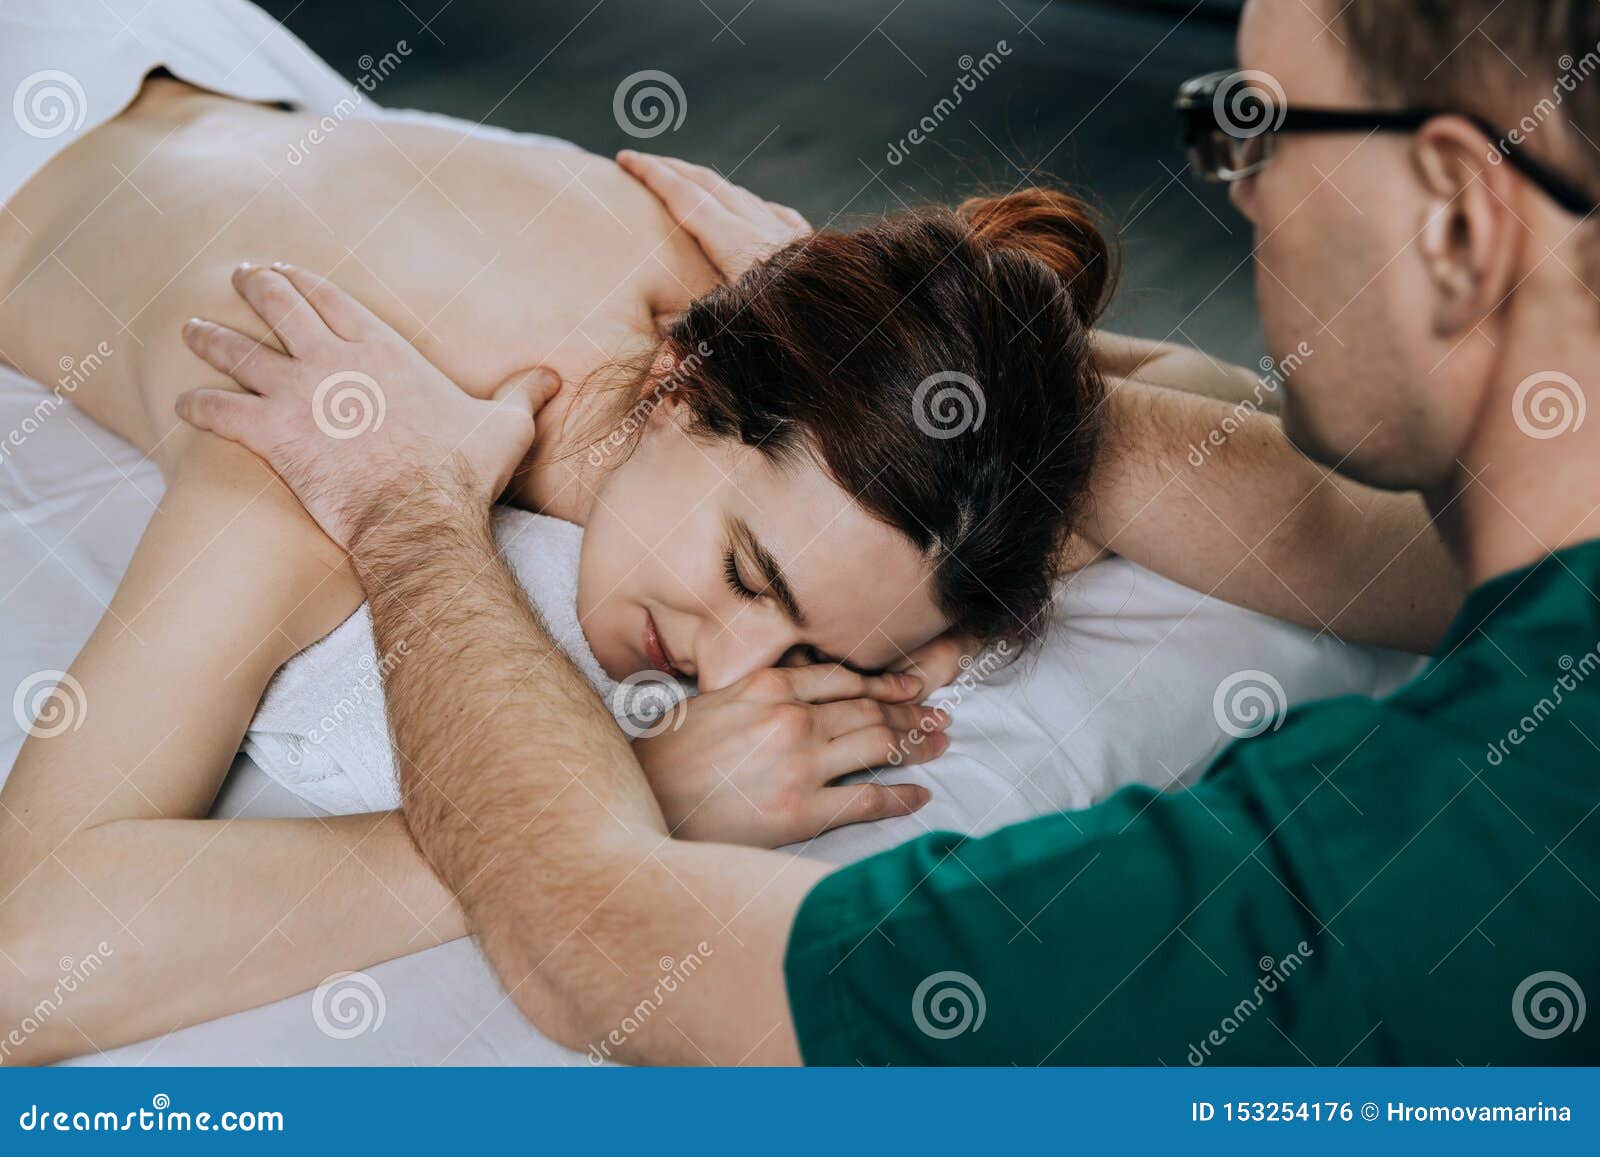 massage therapist doing shoulder massager of a young woman. beautiful relaxed face of a young woman with brown hair